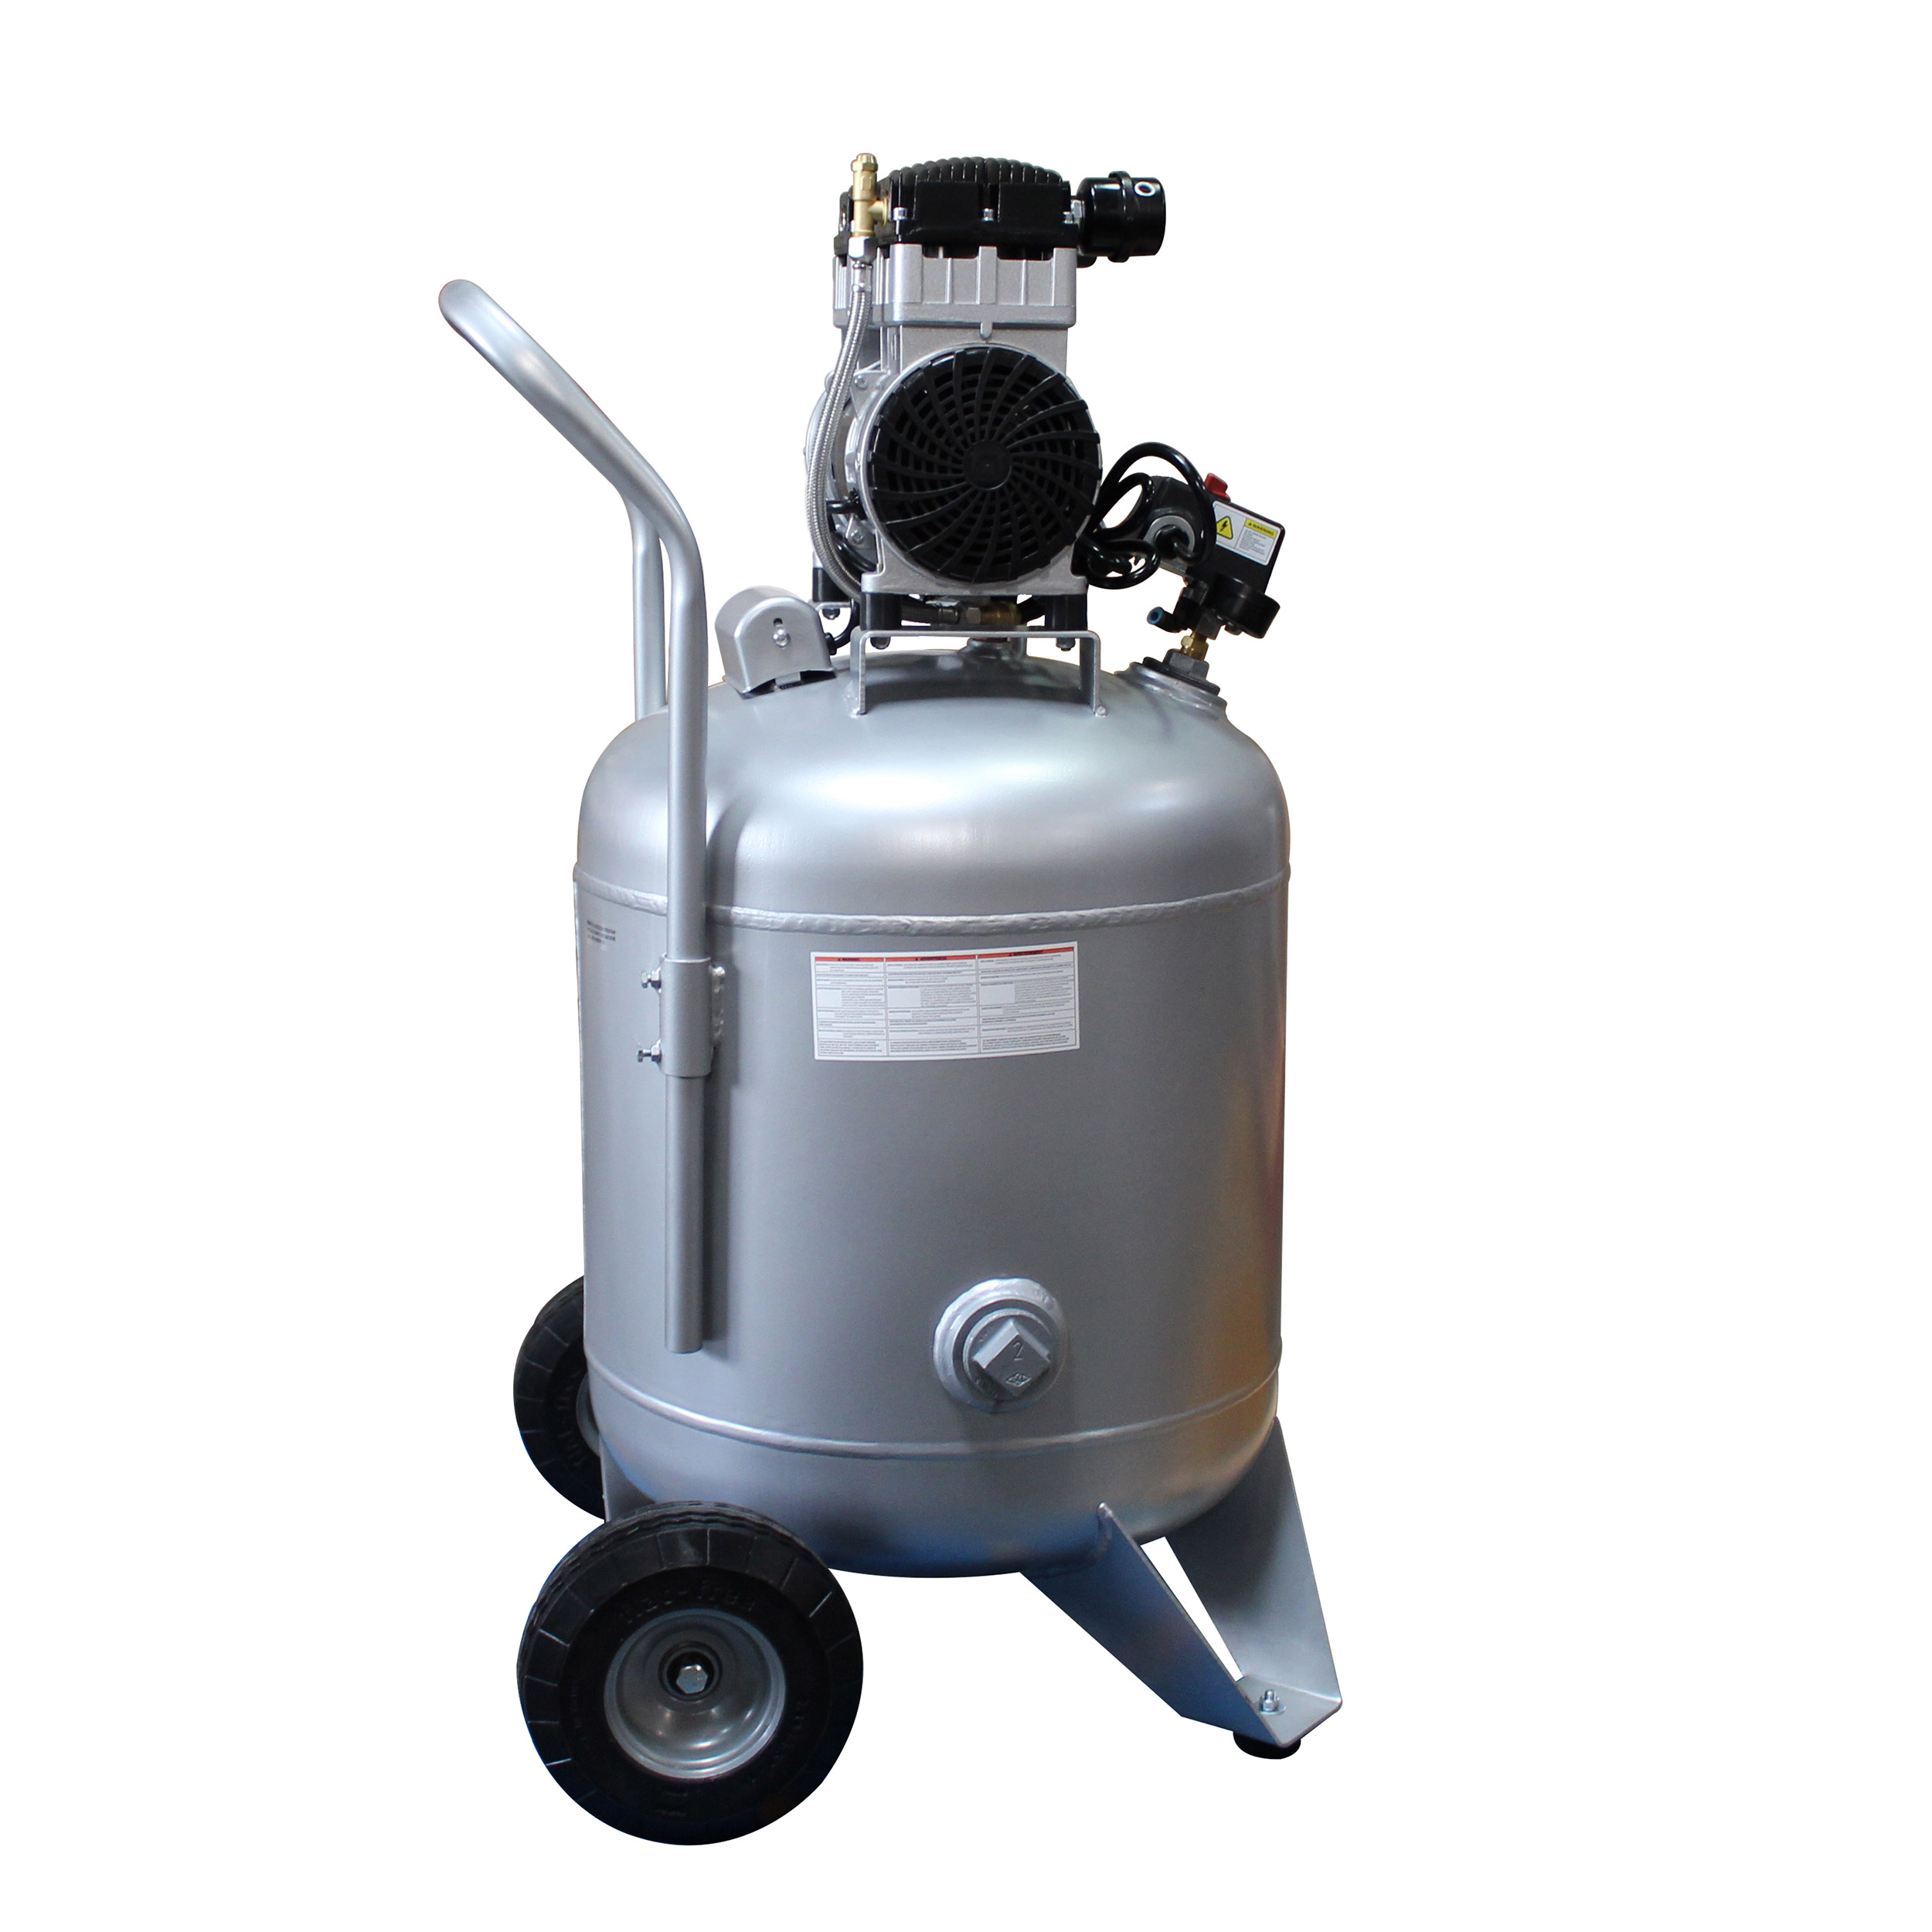 Steel Tank Air Compressor, With Automatic Drain Valve, 30020cad-22060, Ultra Quiet & Oil-free, 2.0 Hp, 30 Gallon, 220v